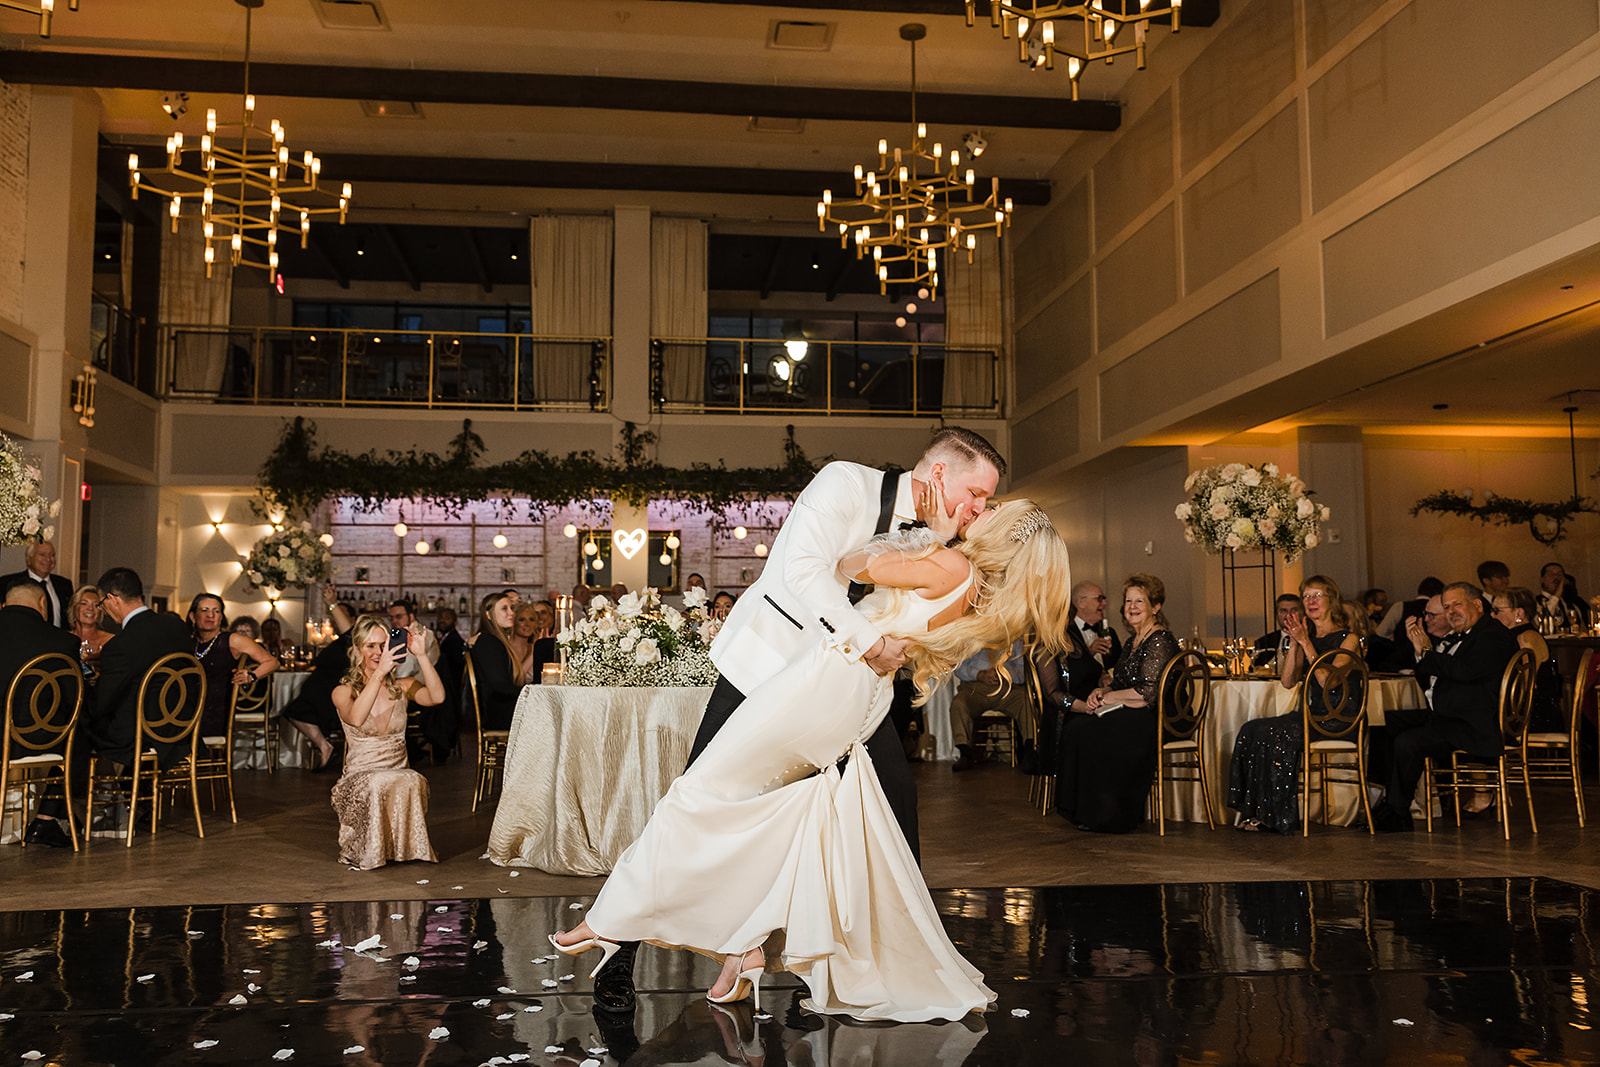 The first dance of the bride and groom at The Lucy by Cescaphe Philadelphia wedding reception